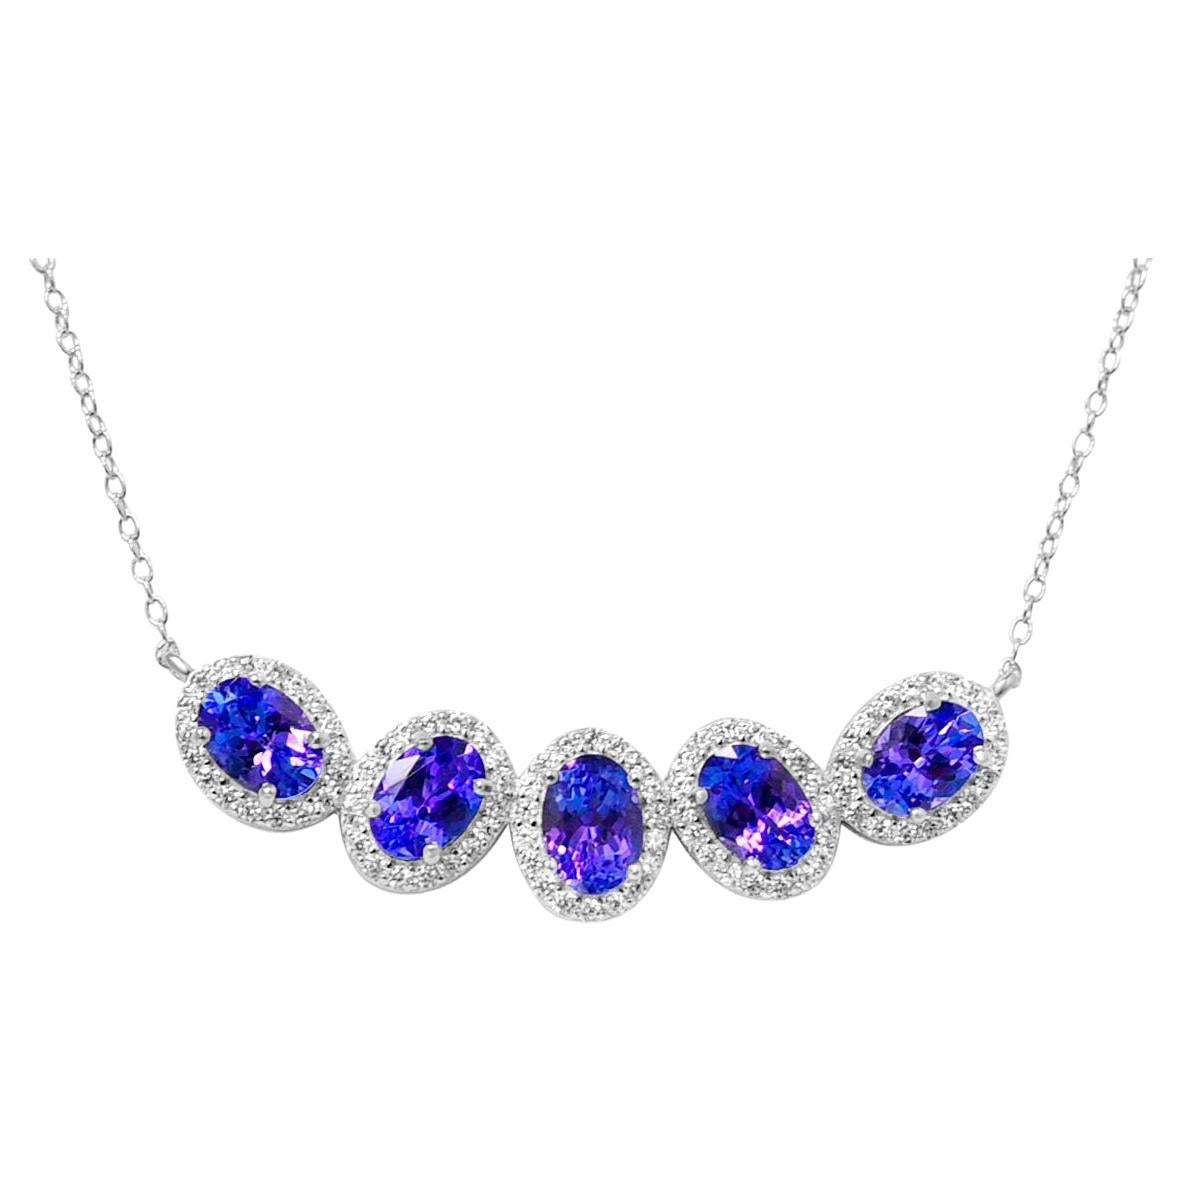 Woman Bridas Tanzanite Pendant Necklace 4 cts Sterling Silver . For Sale